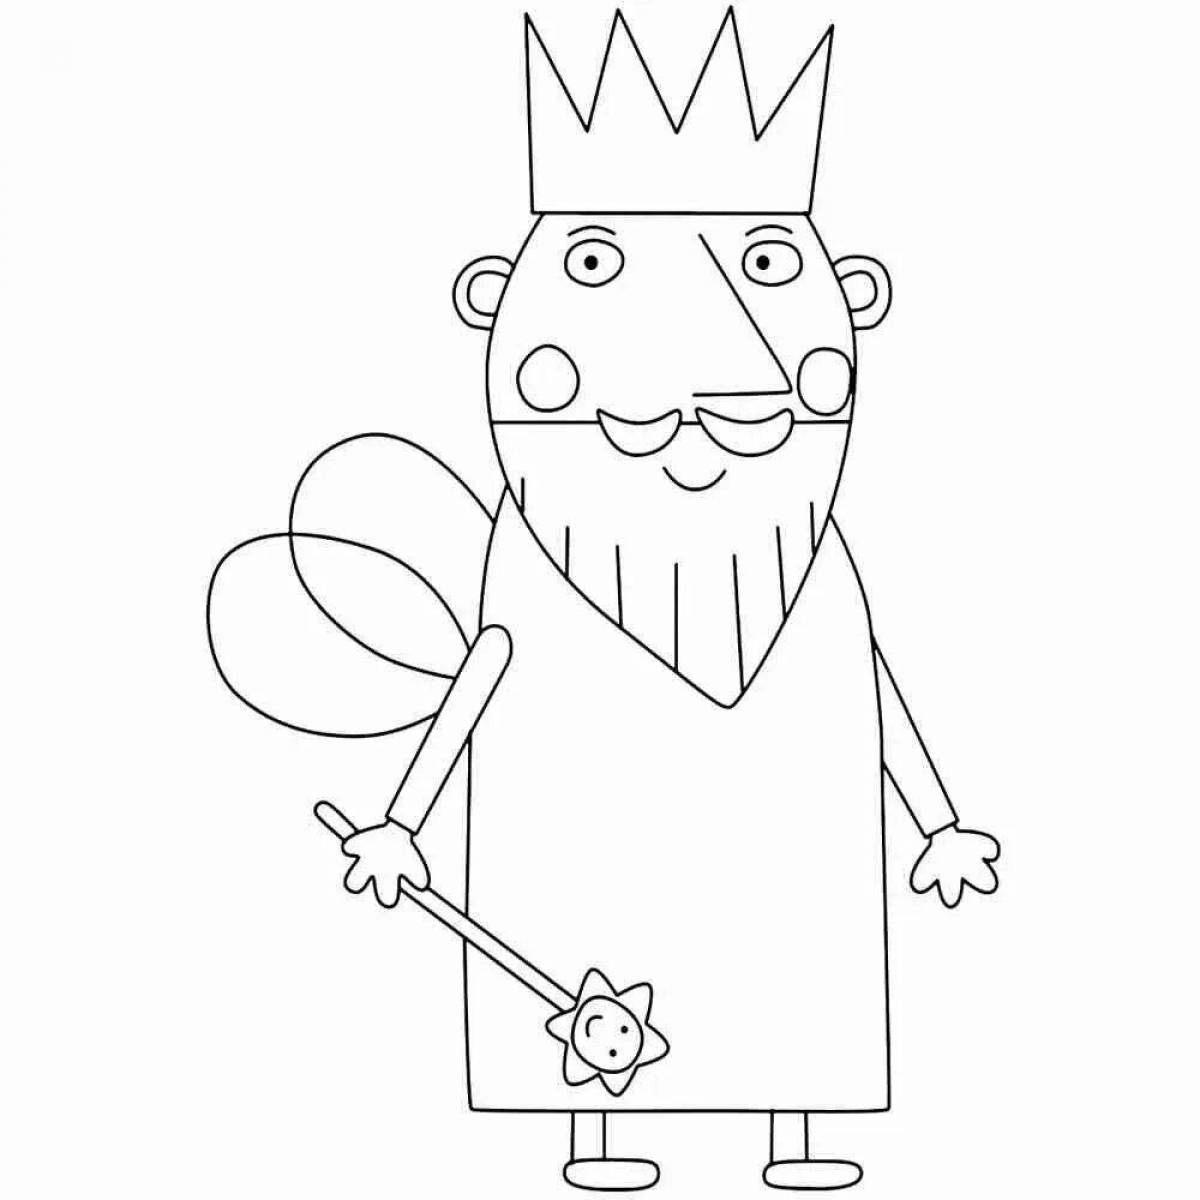 King's colorful coloring book for kids